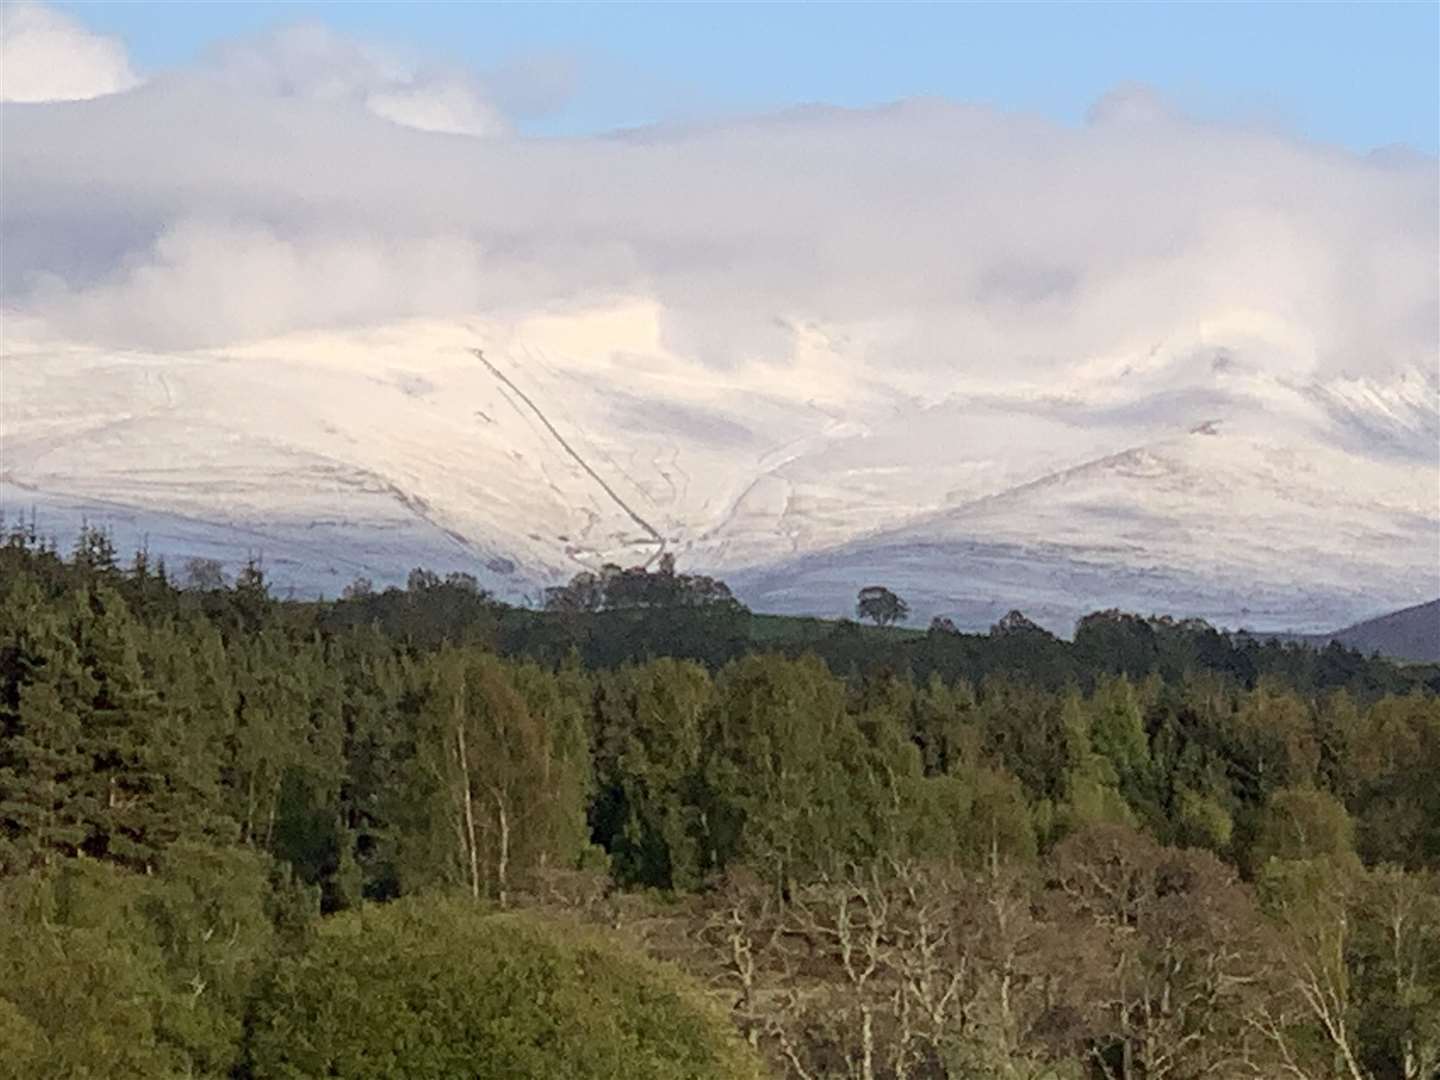 The Cairngorm ski area and wider estate pictured from the Spey Valley Golf Course in Aviemore.